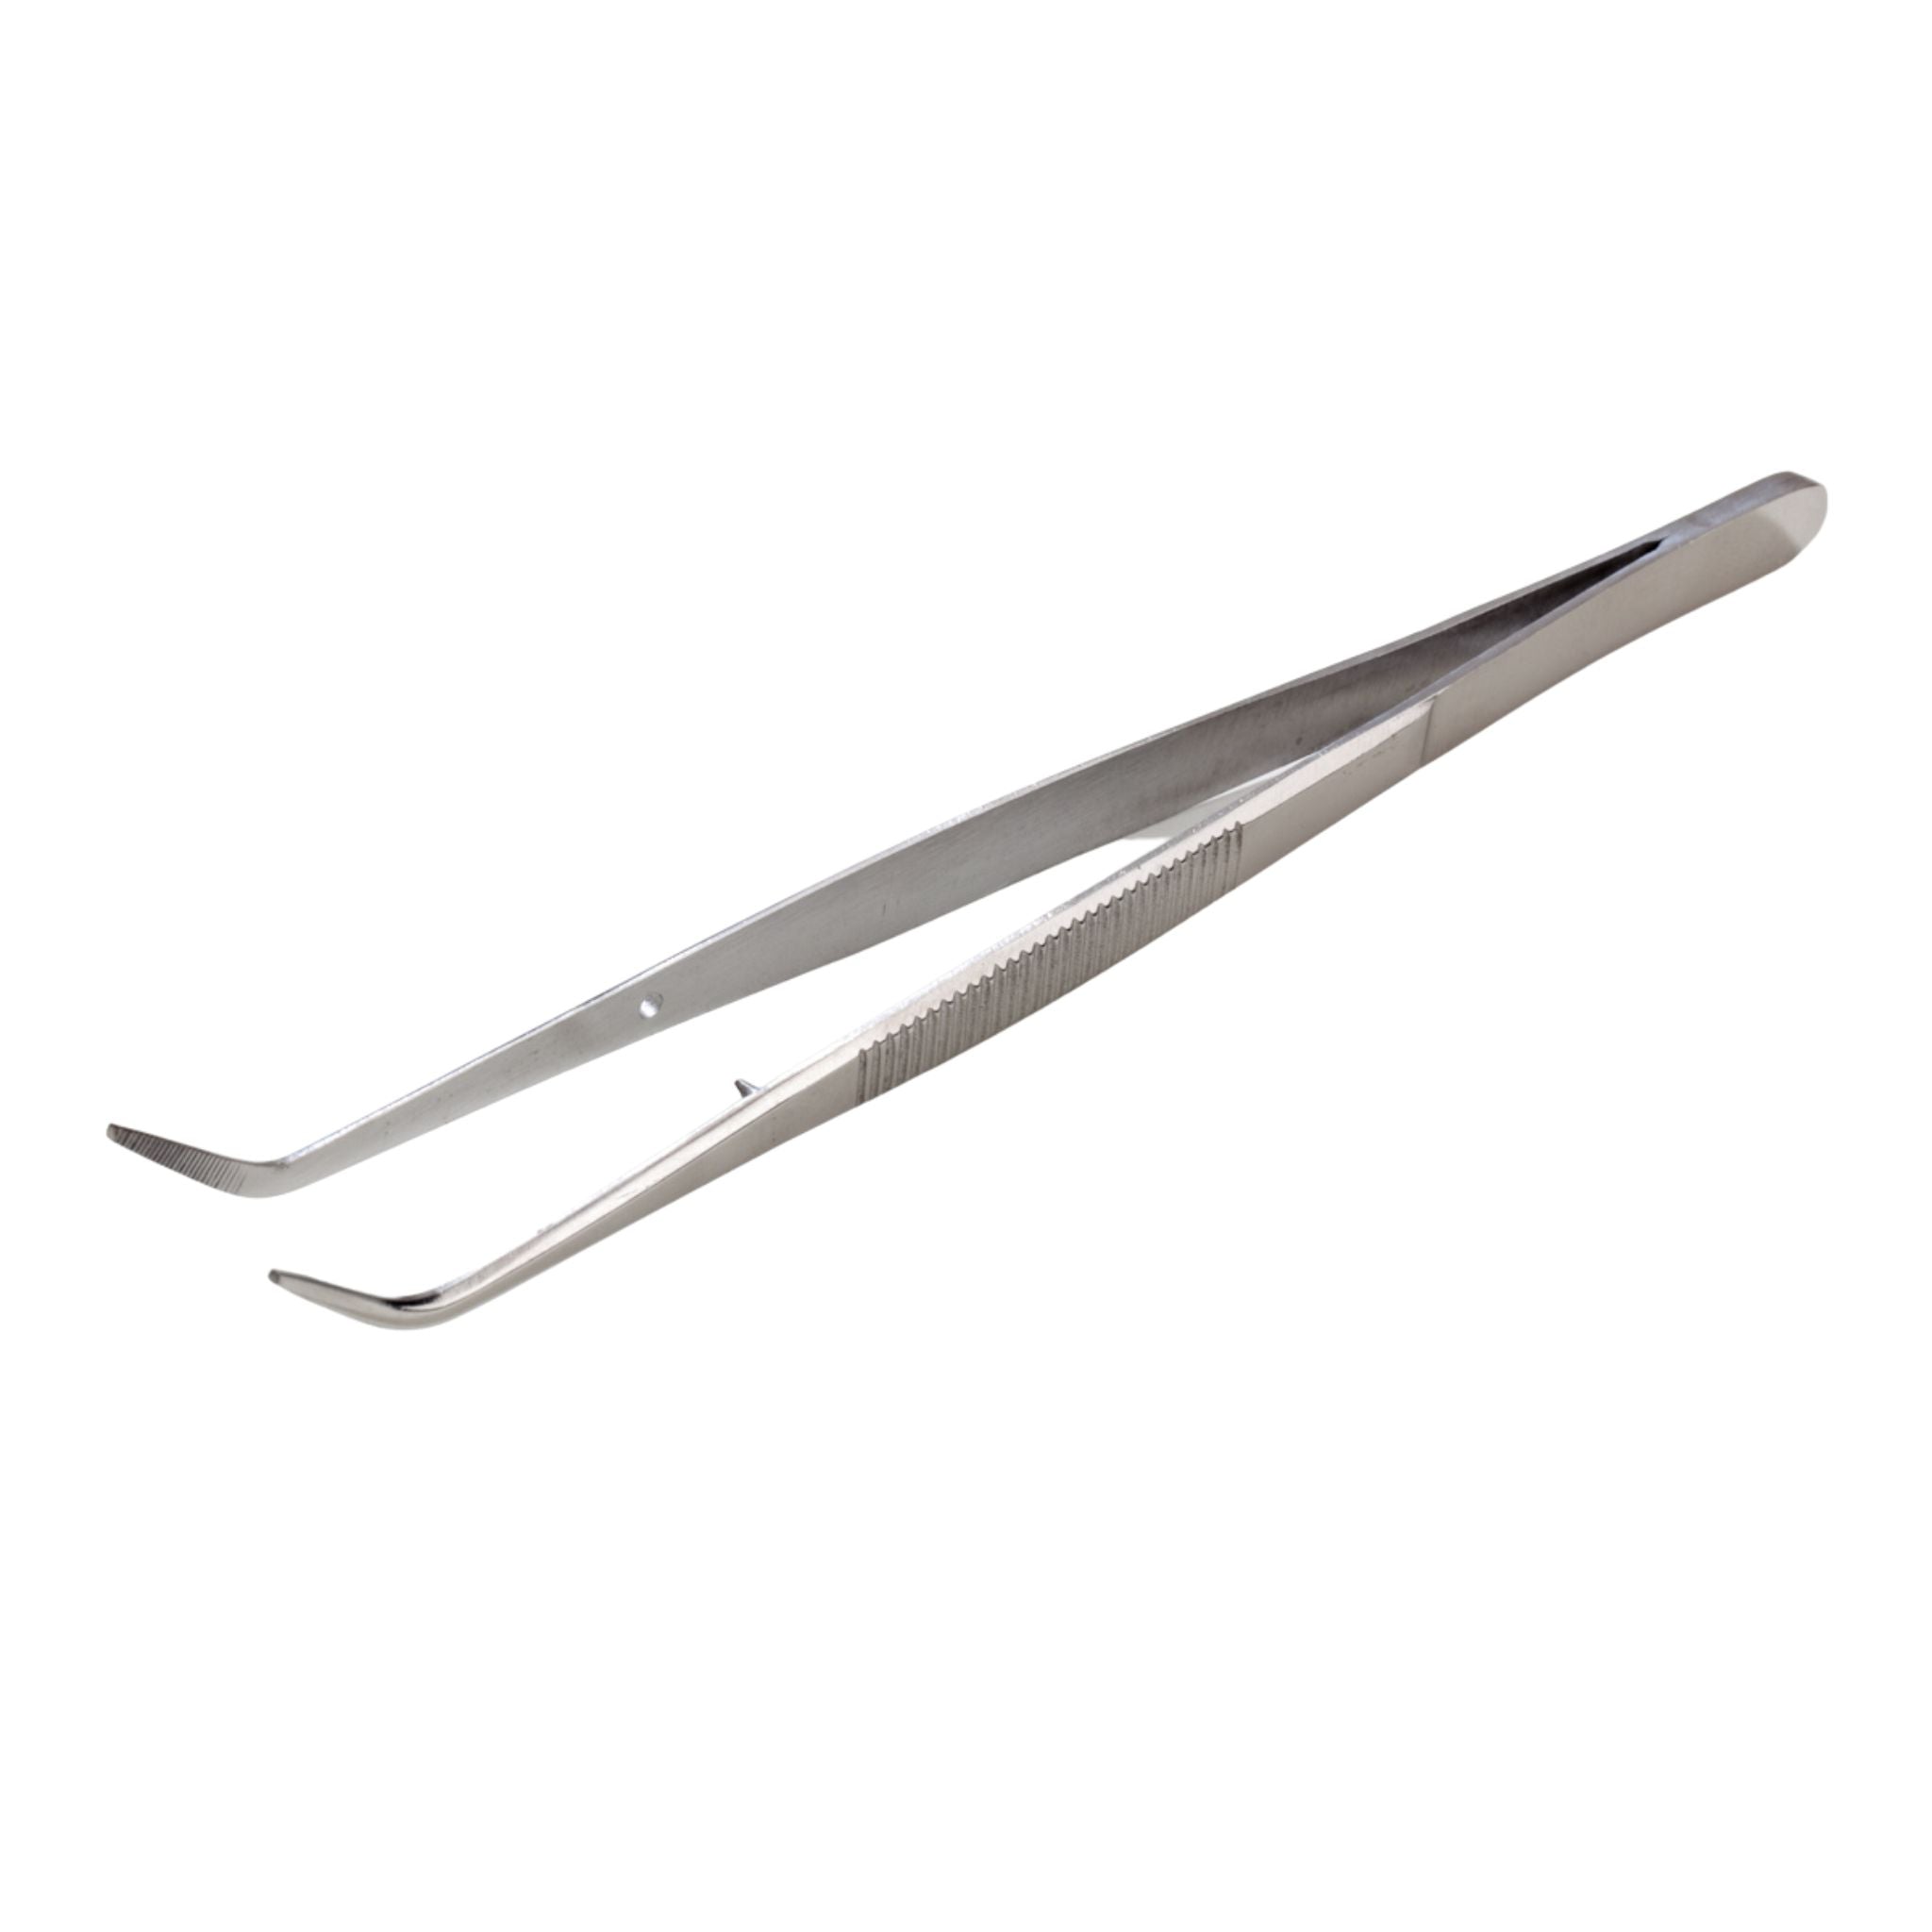 2PCS bodkin sewing tool Pointed Curved Tweezers Straight Curved Tweezers